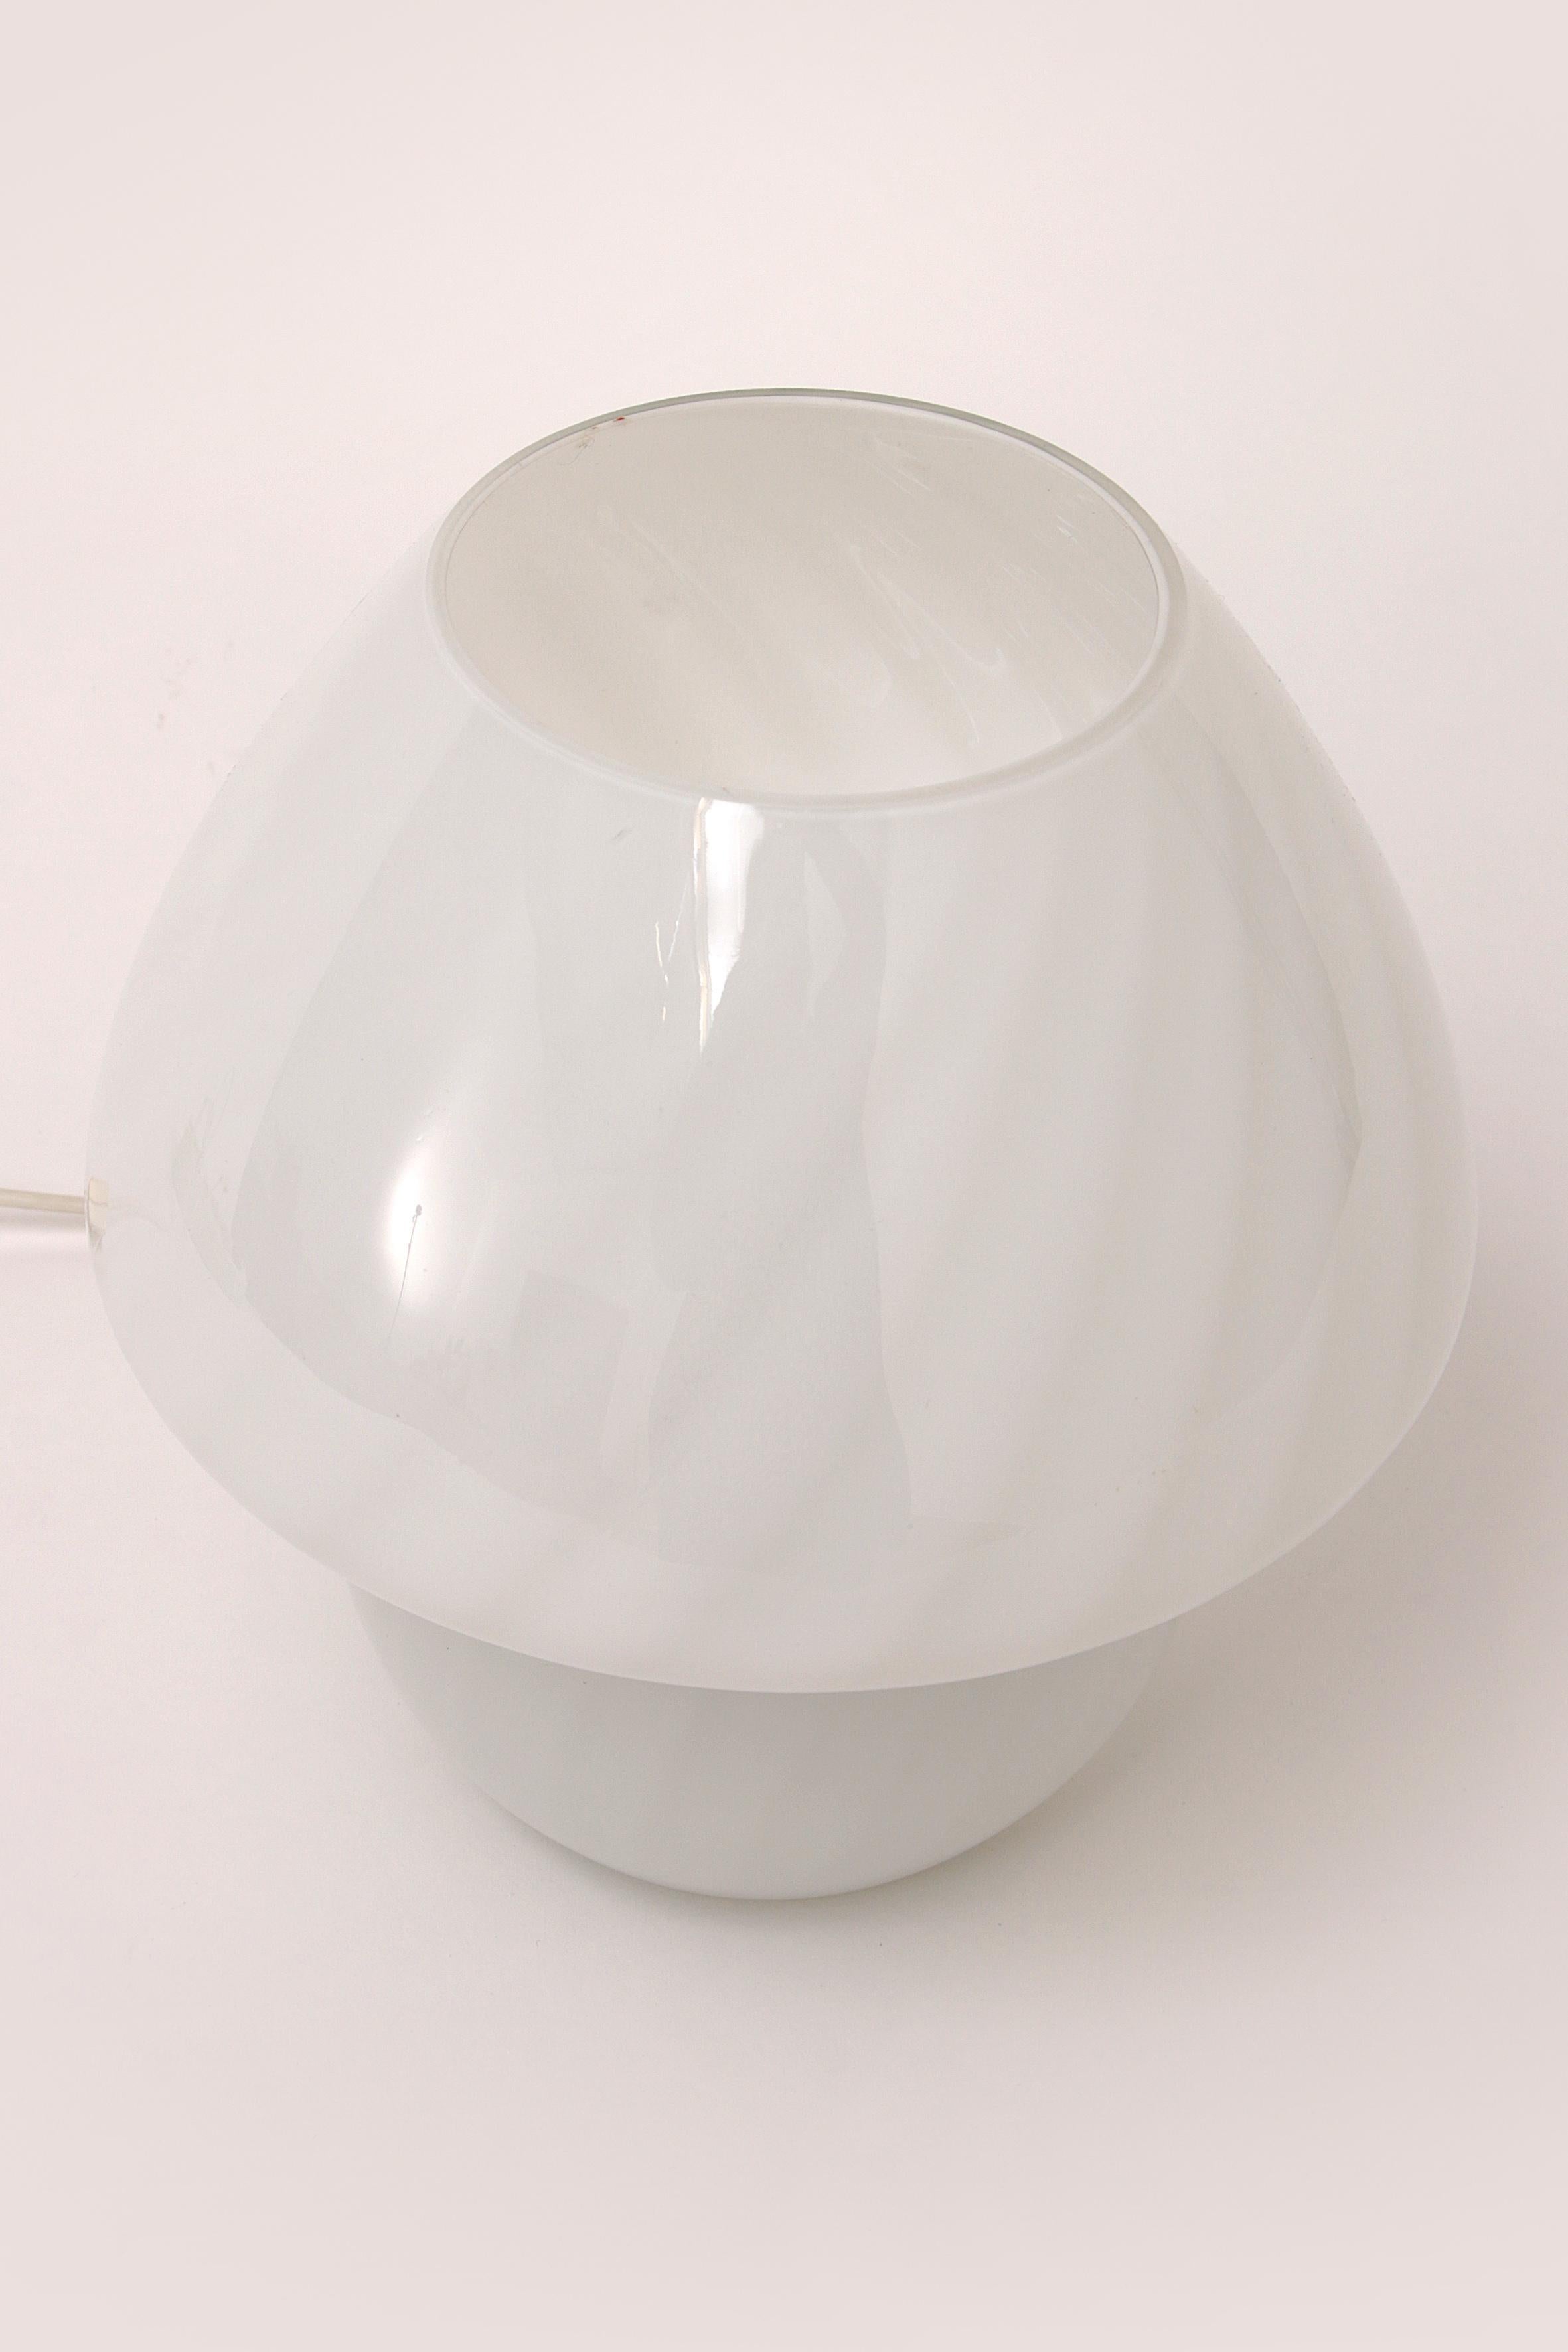 Mid-20th Century Vintage White Mushroom Lamp by Glashutte, 1960 Germany For Sale